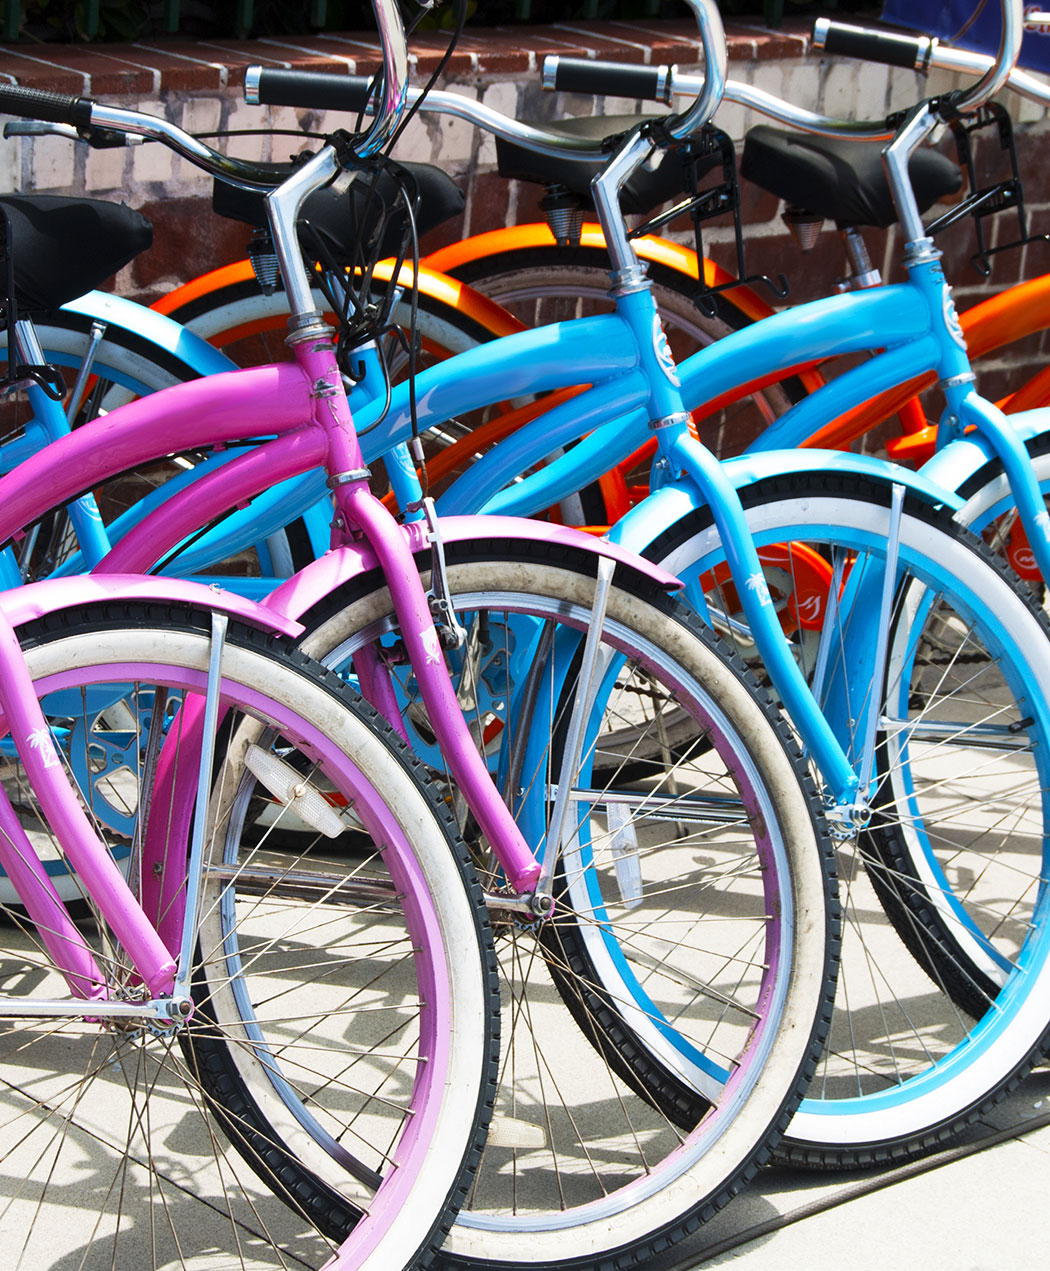 purple, blue and red bicylces lined up